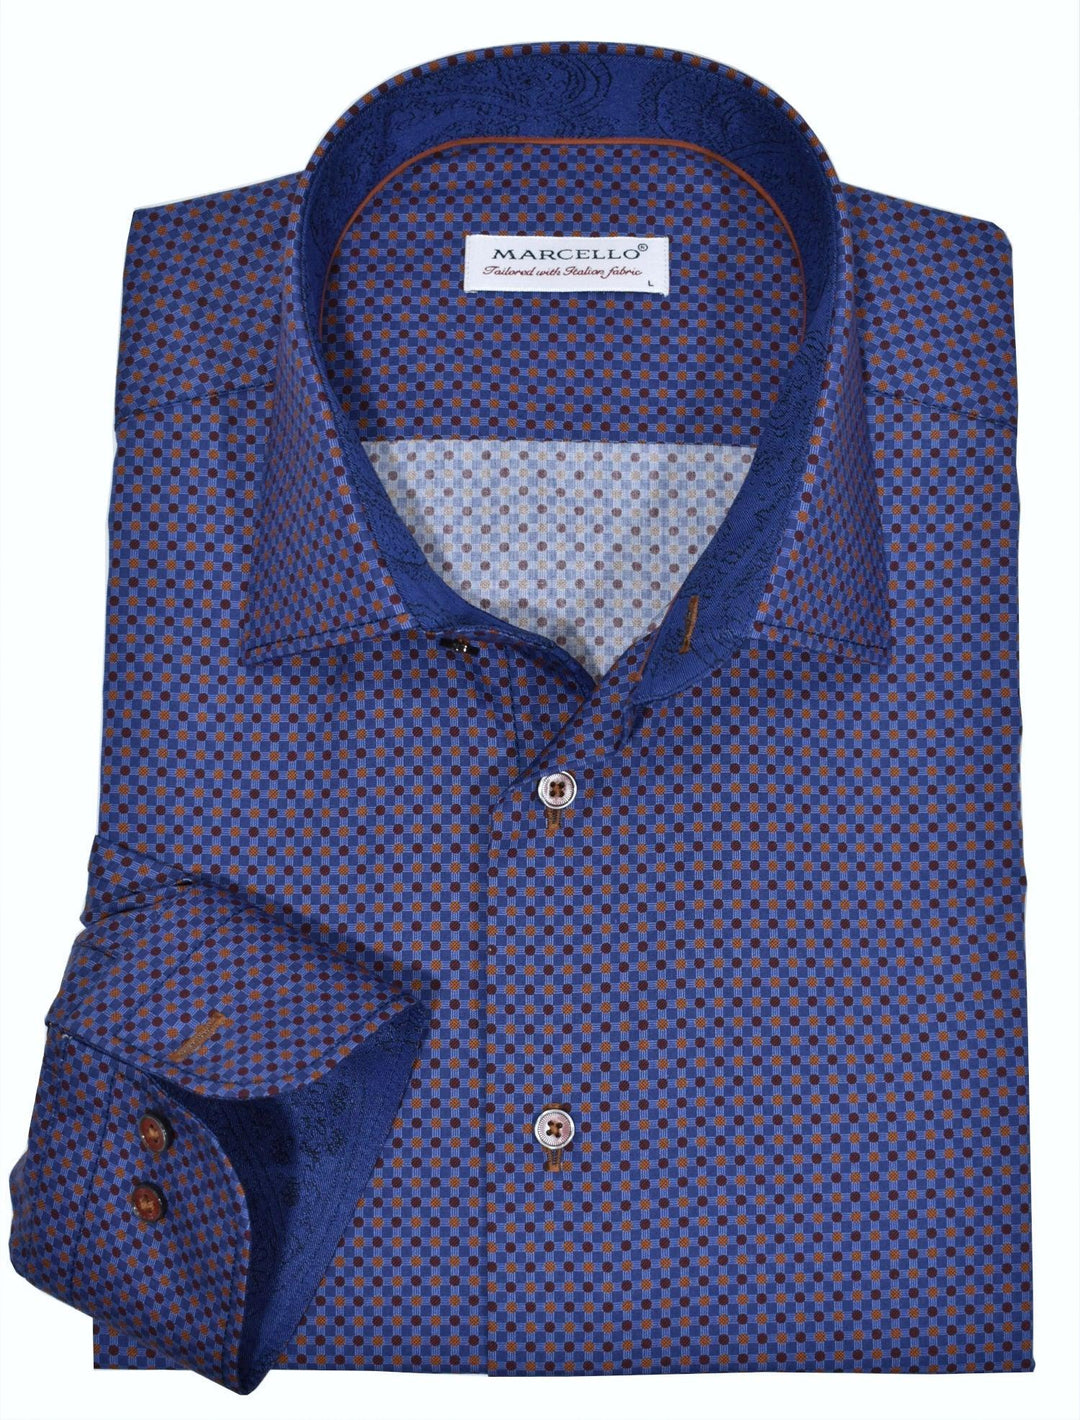 An outstanding combination of a classic window pane plaid pattern married with a colored dot pattern in complimentary colors.  The result is a sharp sport shirt perfect for dress or casual events.  Soft cotton sateen feels great on. Custom matched buttons and contrast stitch detailing. Matched trim fabric and contrast piping adds fashion style. Medium spread collar. Classic shaped fit, perfect for a medium build.  Shirt by Marcello Sport.